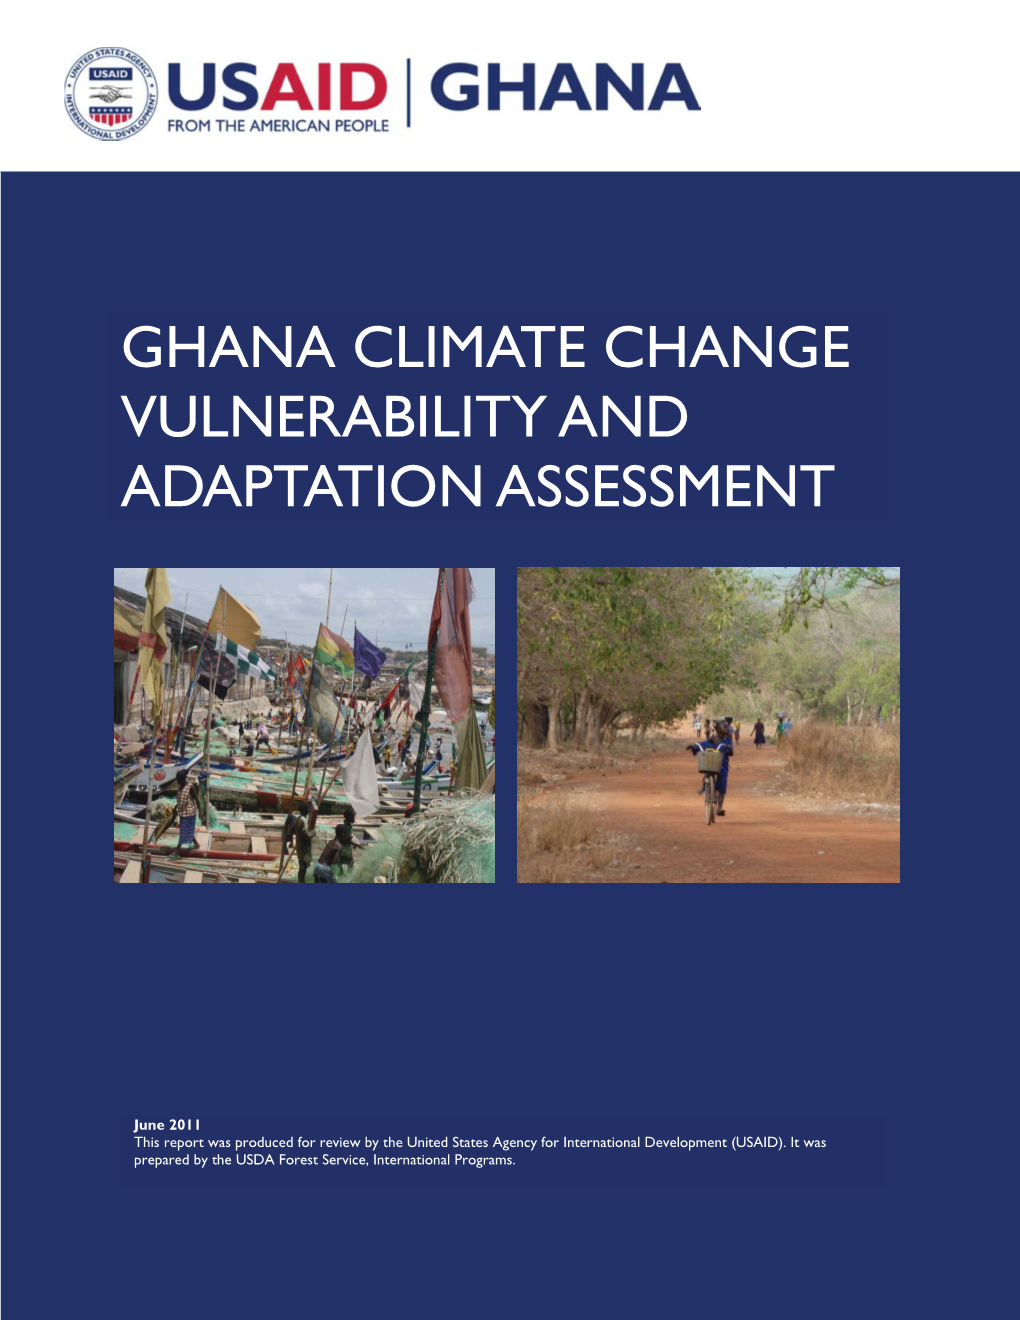 Ghana Climate Change Vulnerability and Adaptation Assessment